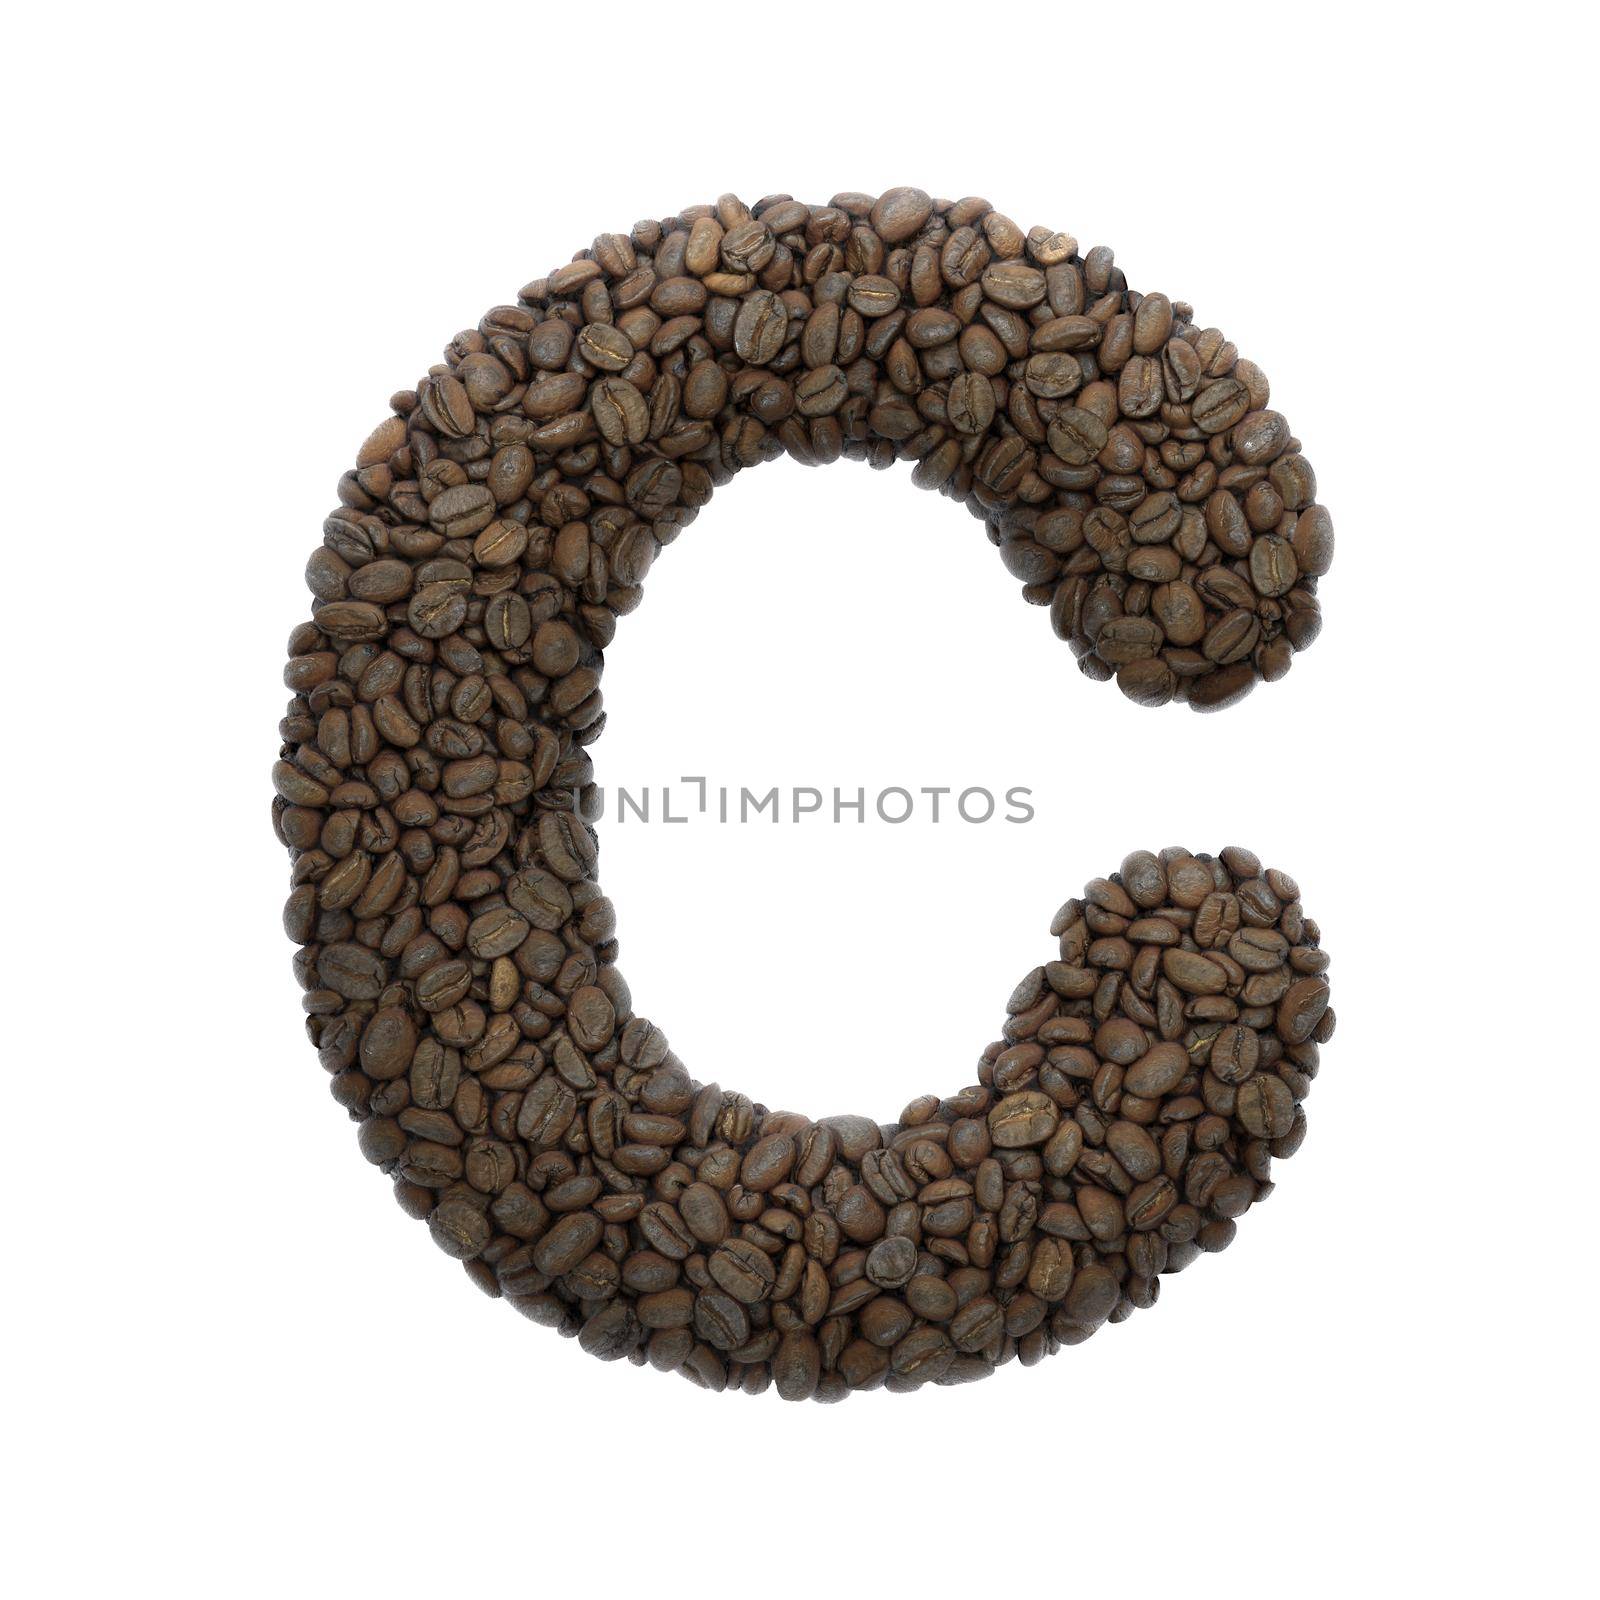 Coffee letter C - Capital 3d roasted beans font - suitable for Coffee, energy or insomnia related subjects by chrisroll